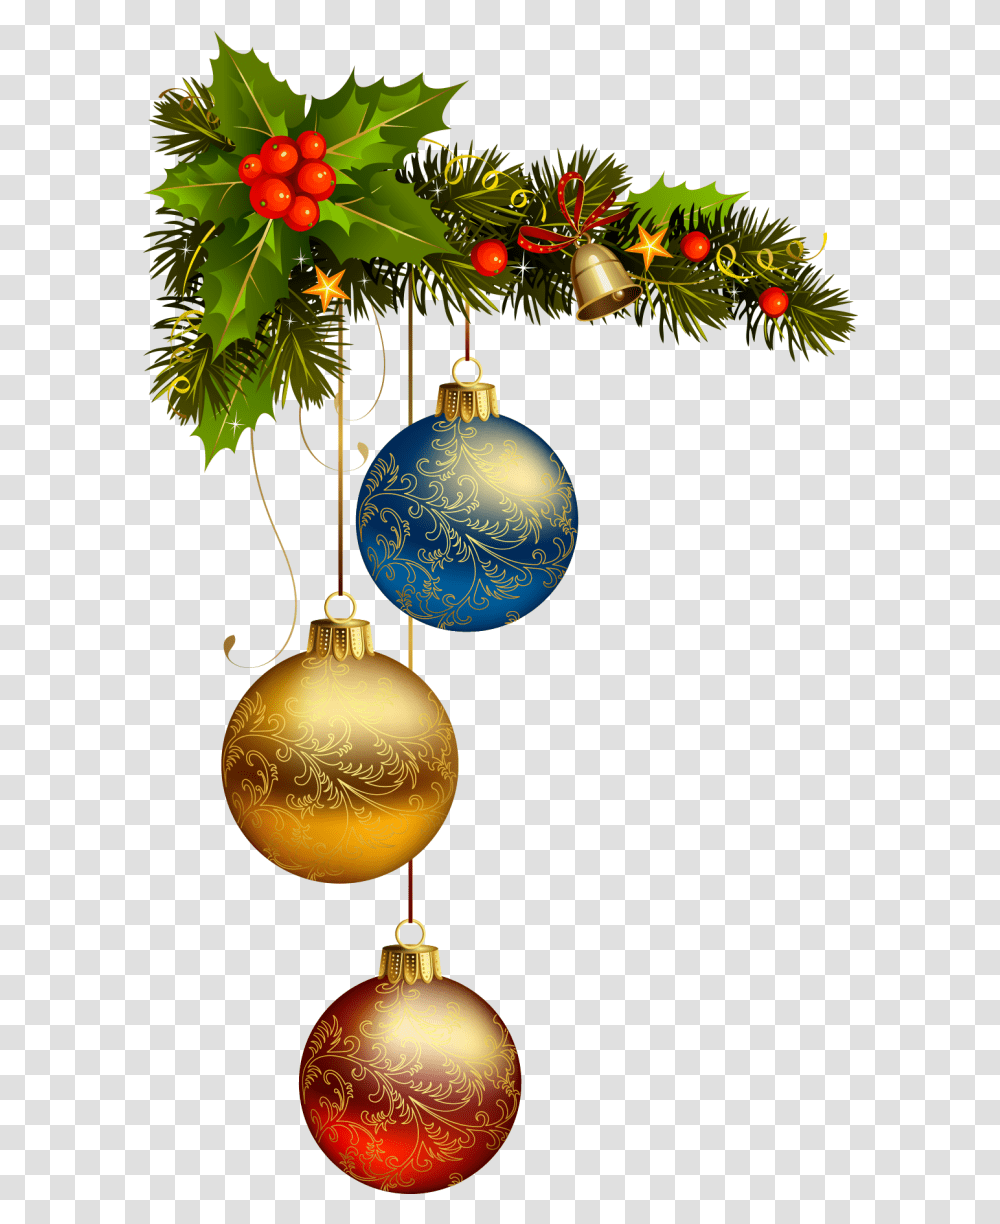 Christmas Decoration Image Free Download Searchpngcom Decorations, Ornament, Home Decor, Lamp, Lighting Transparent Png